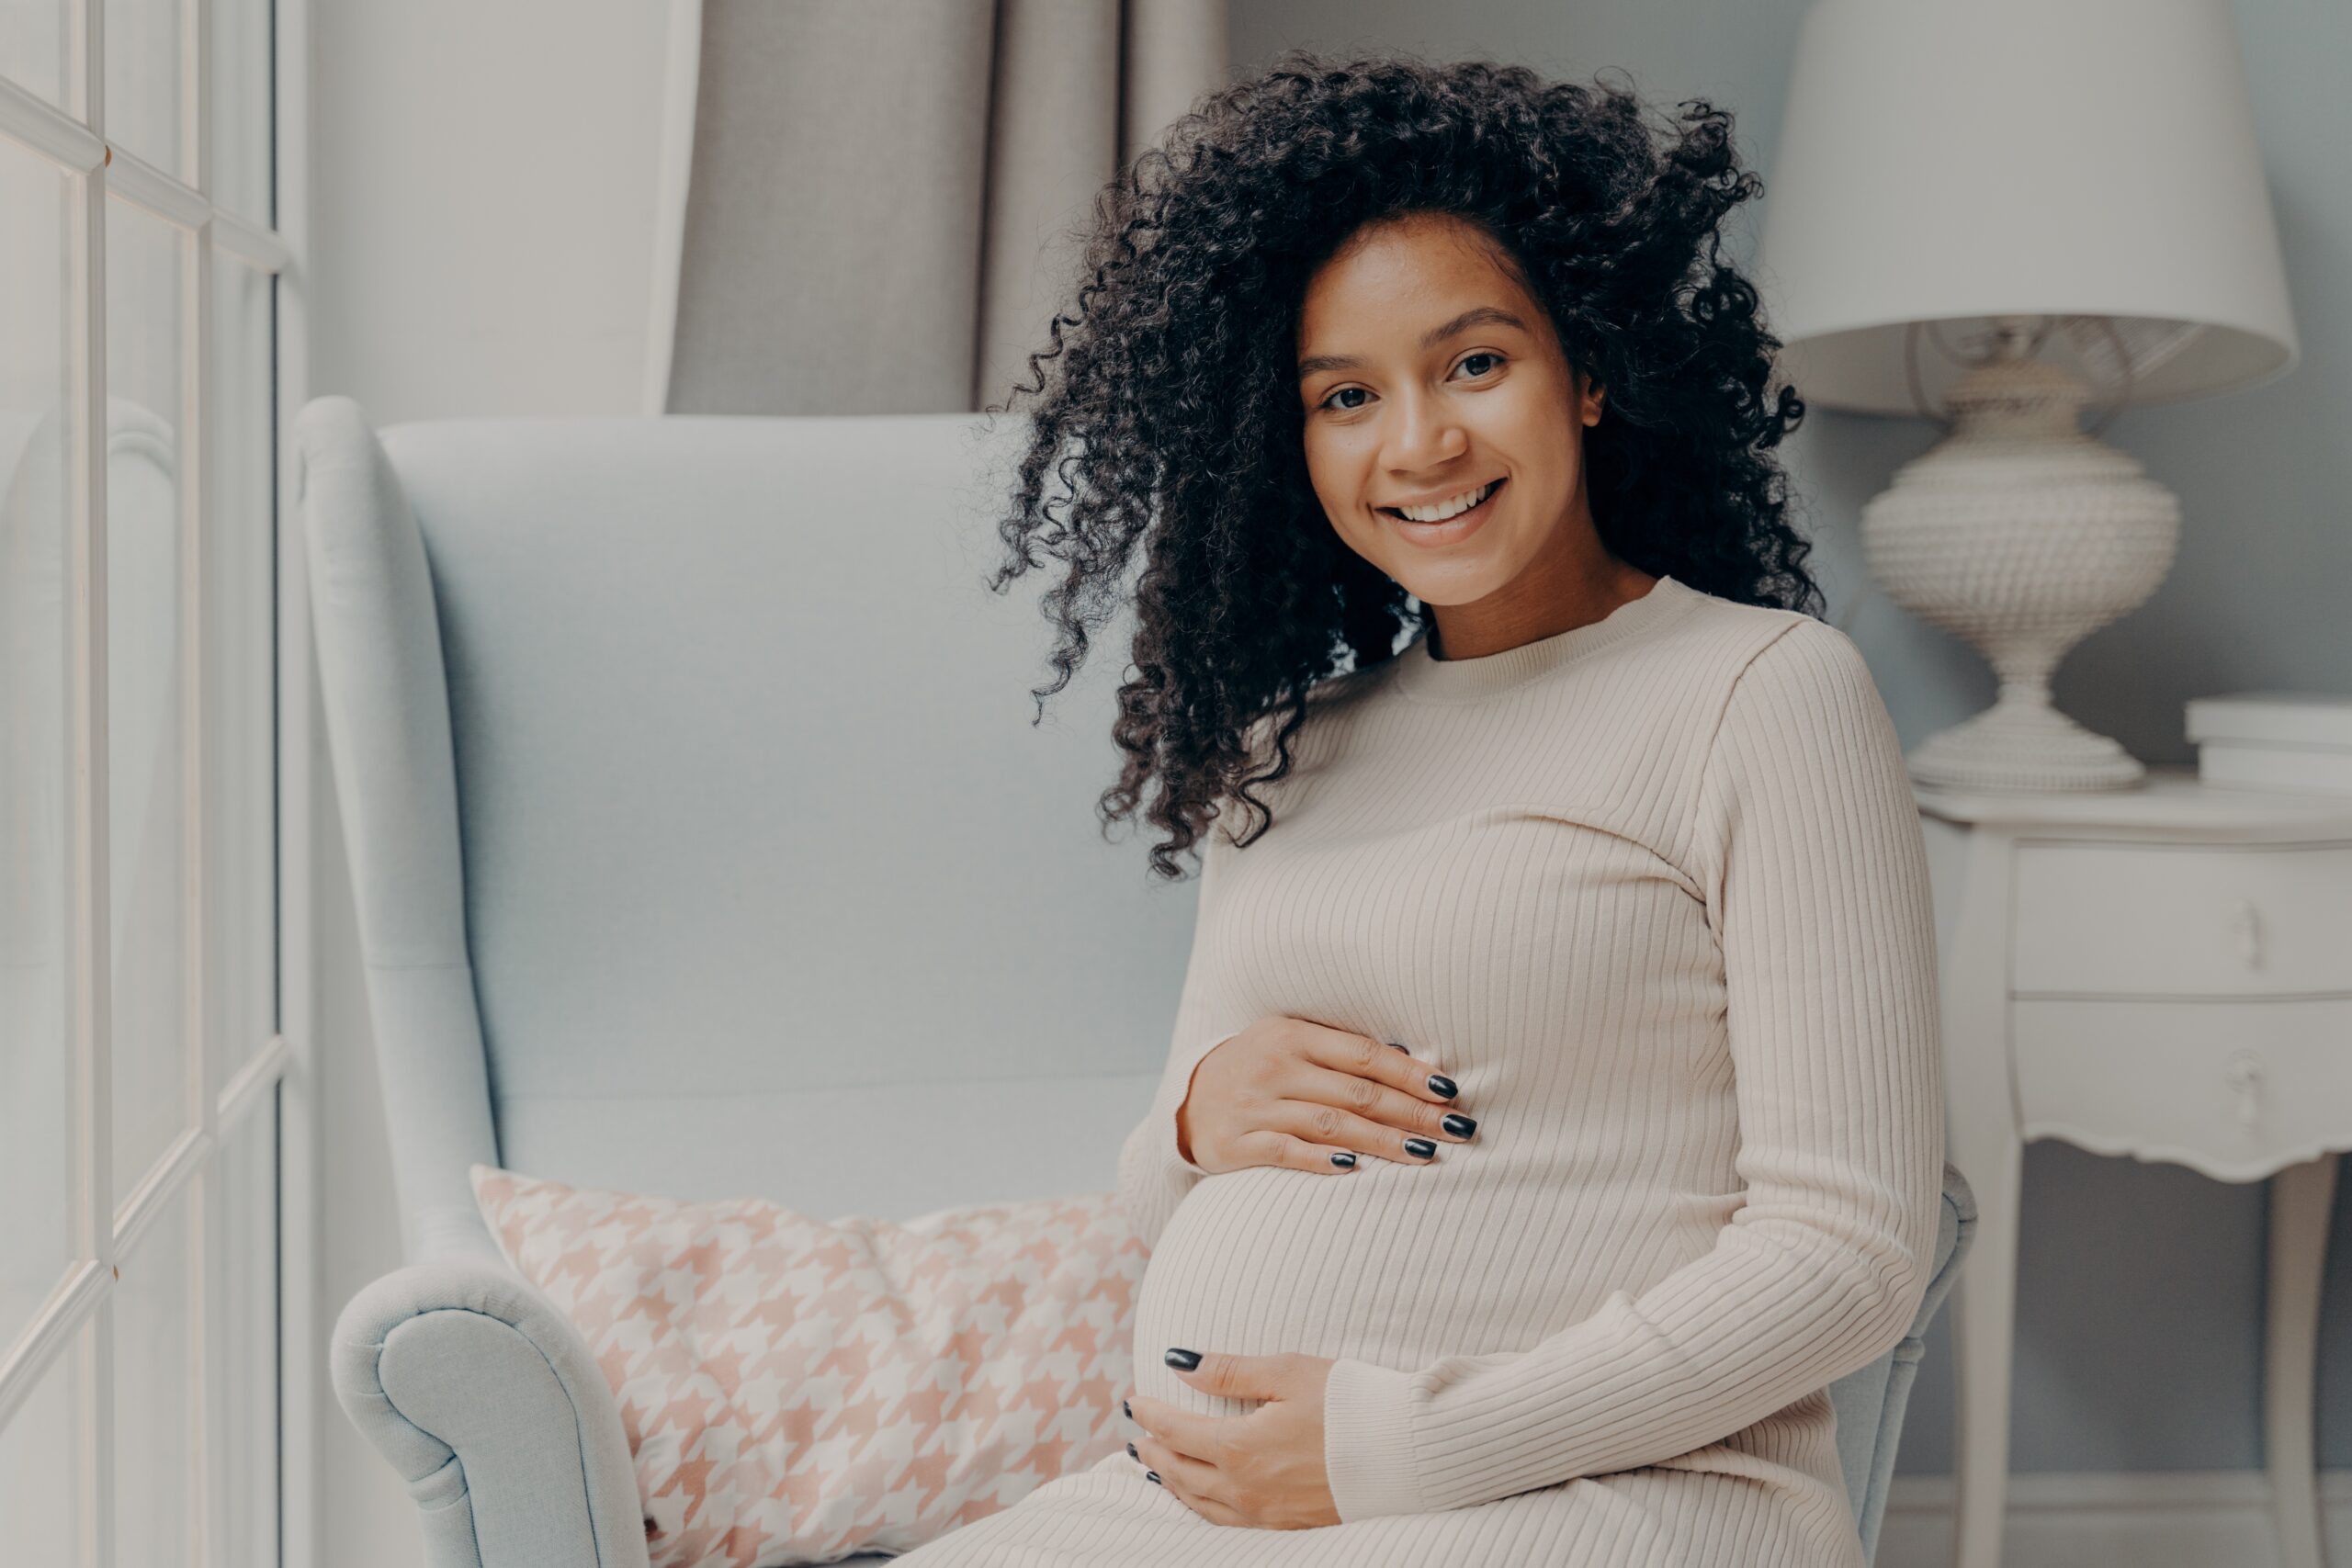 Image of Black pregnant woman, smiling